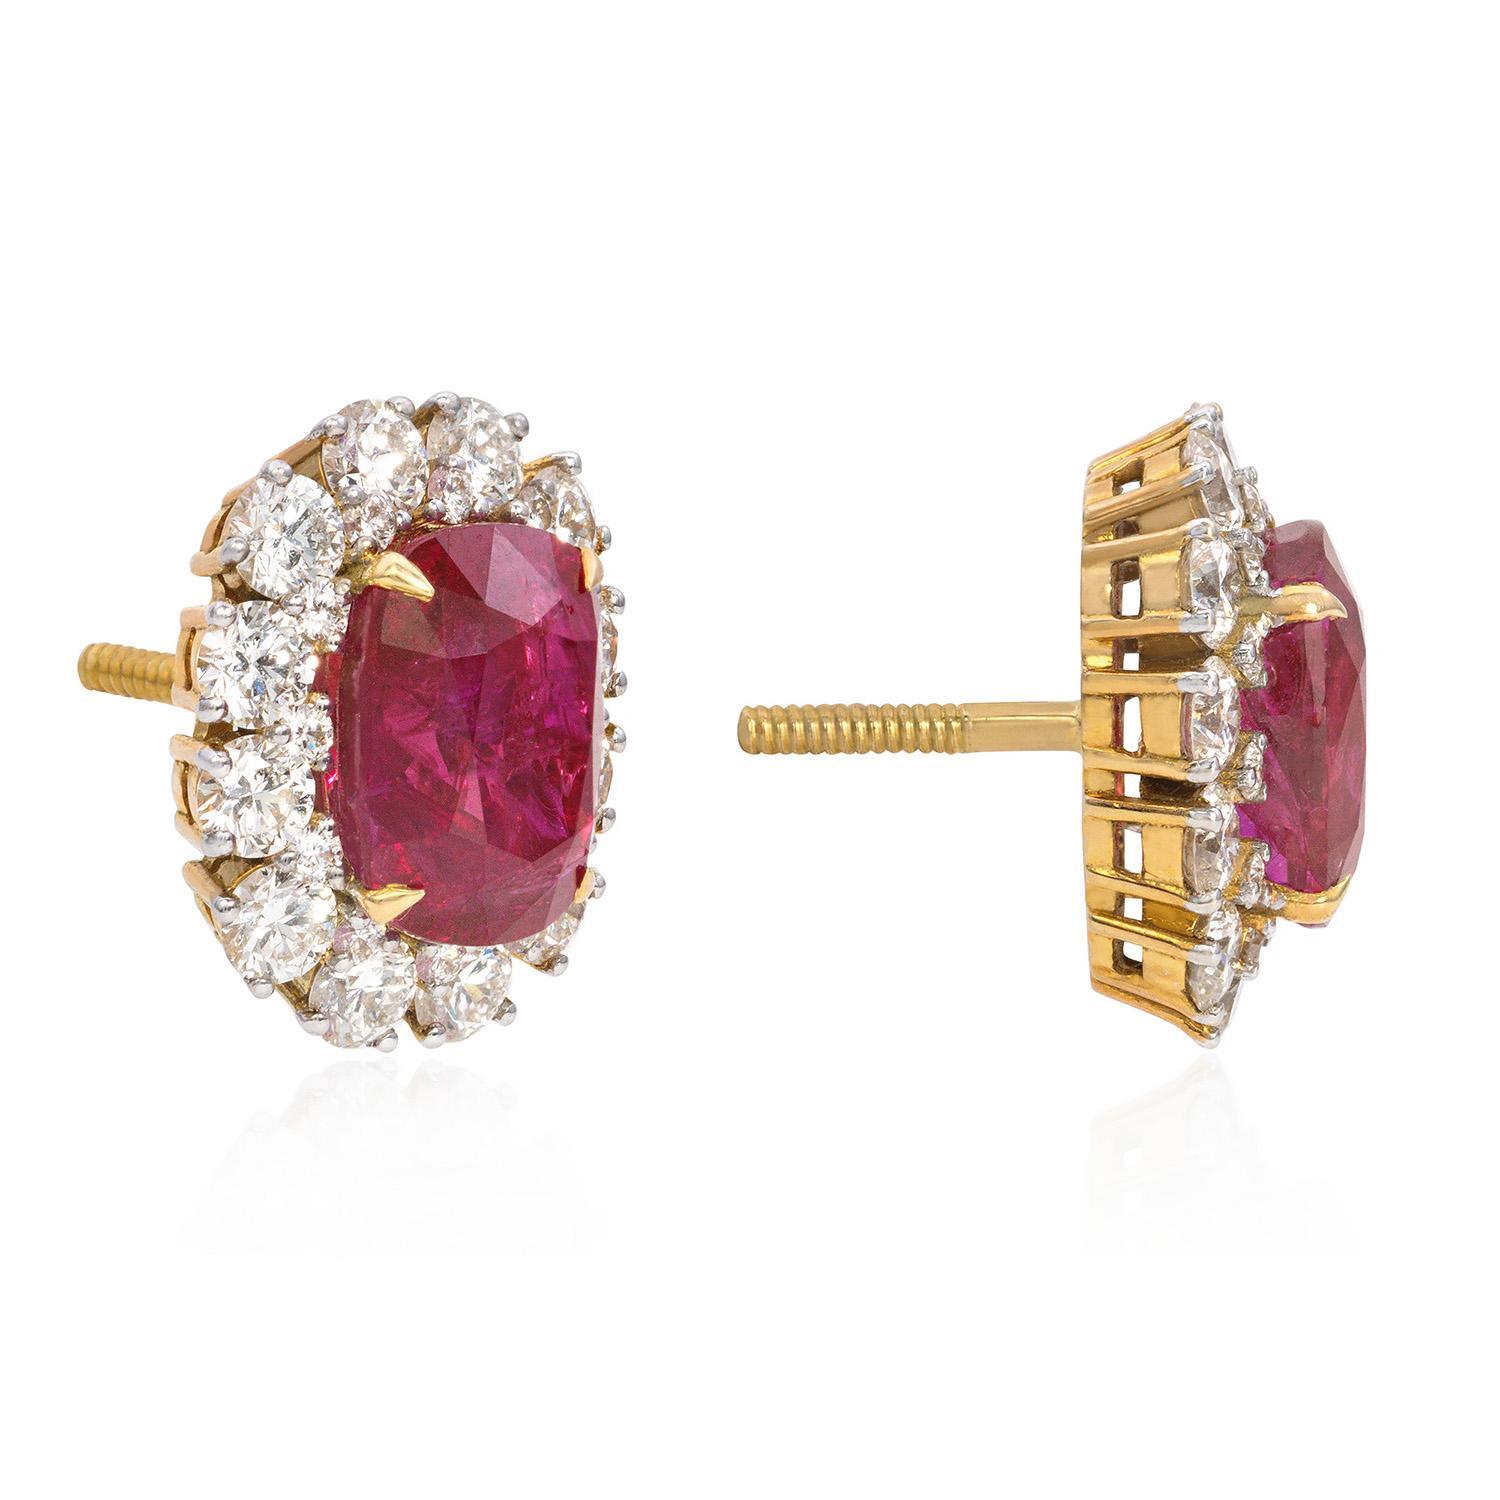 This exquisite earring showcases the timeless beauty of natural rubies set in lustrous 18K yellow gold. The vivid and alluring rubies, with their deep red hue, are the focal point of this elegant piece of jewelry. The 18K yellow gold setting adds a